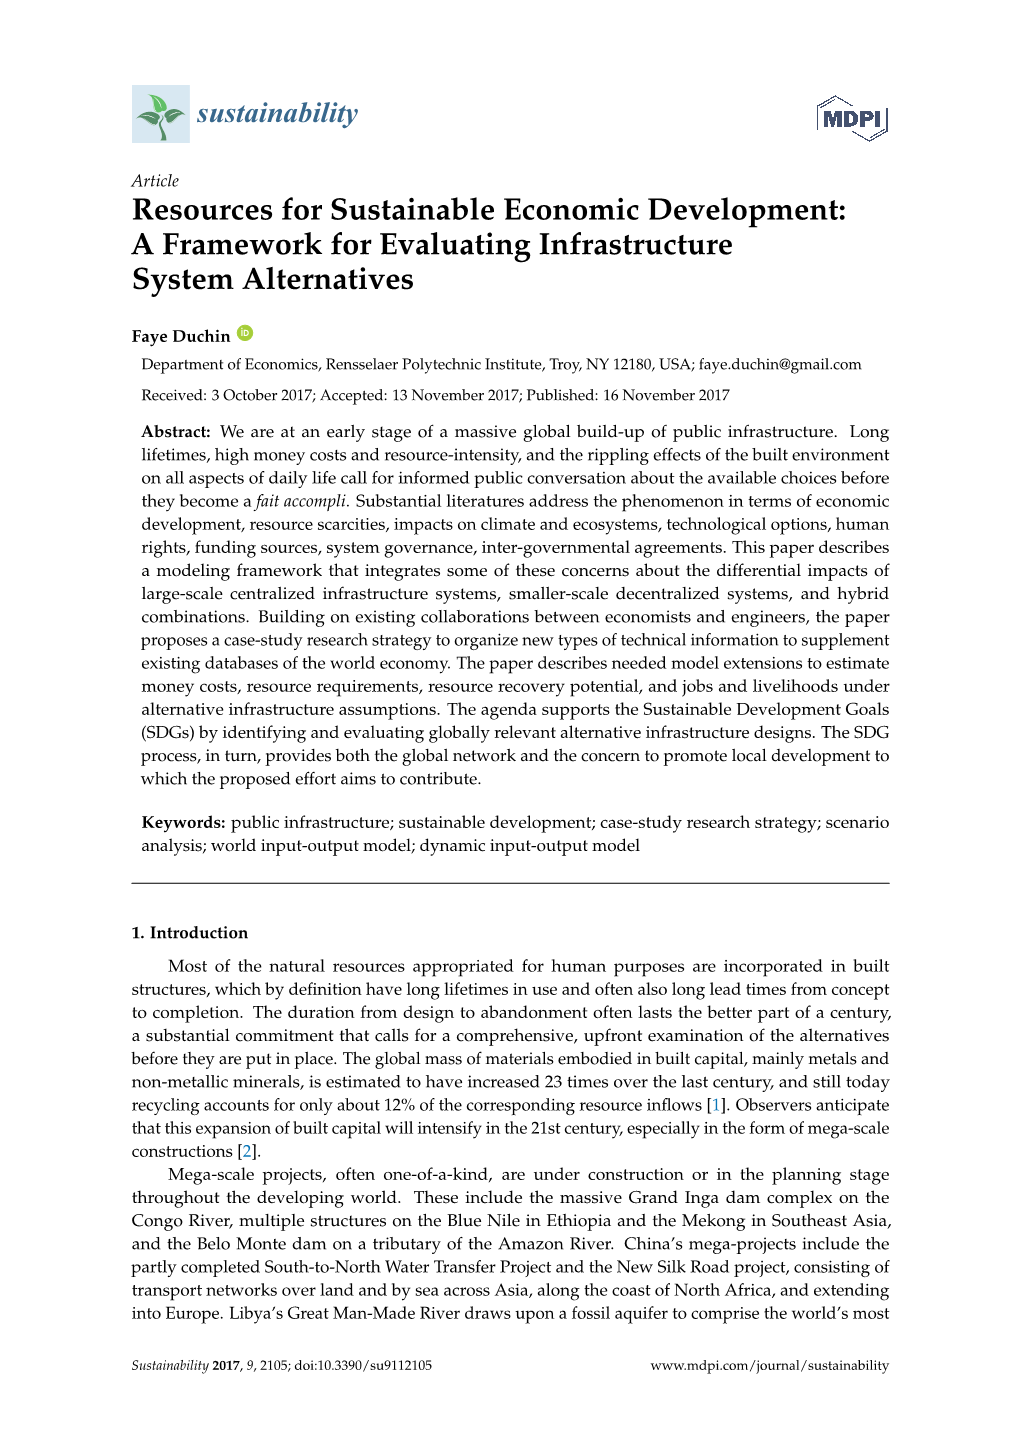 Resources for Sustainable Economic Development: a Framework for Evaluating Infrastructure System Alternatives